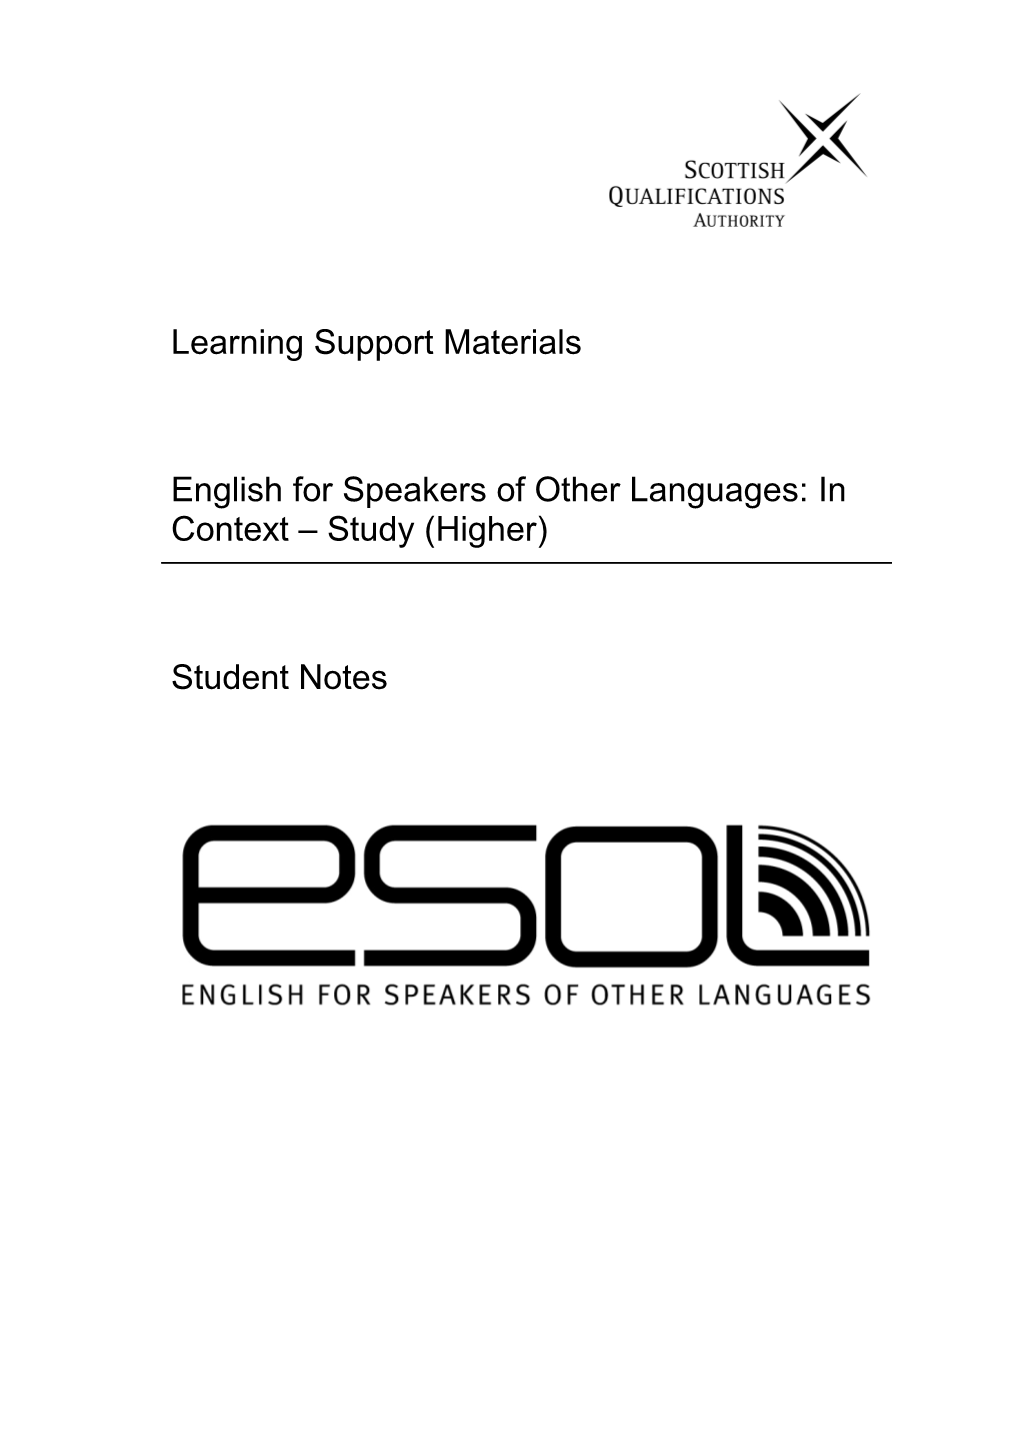 English for Speakers of Other Languages: ESOL in Context Study (Higher)